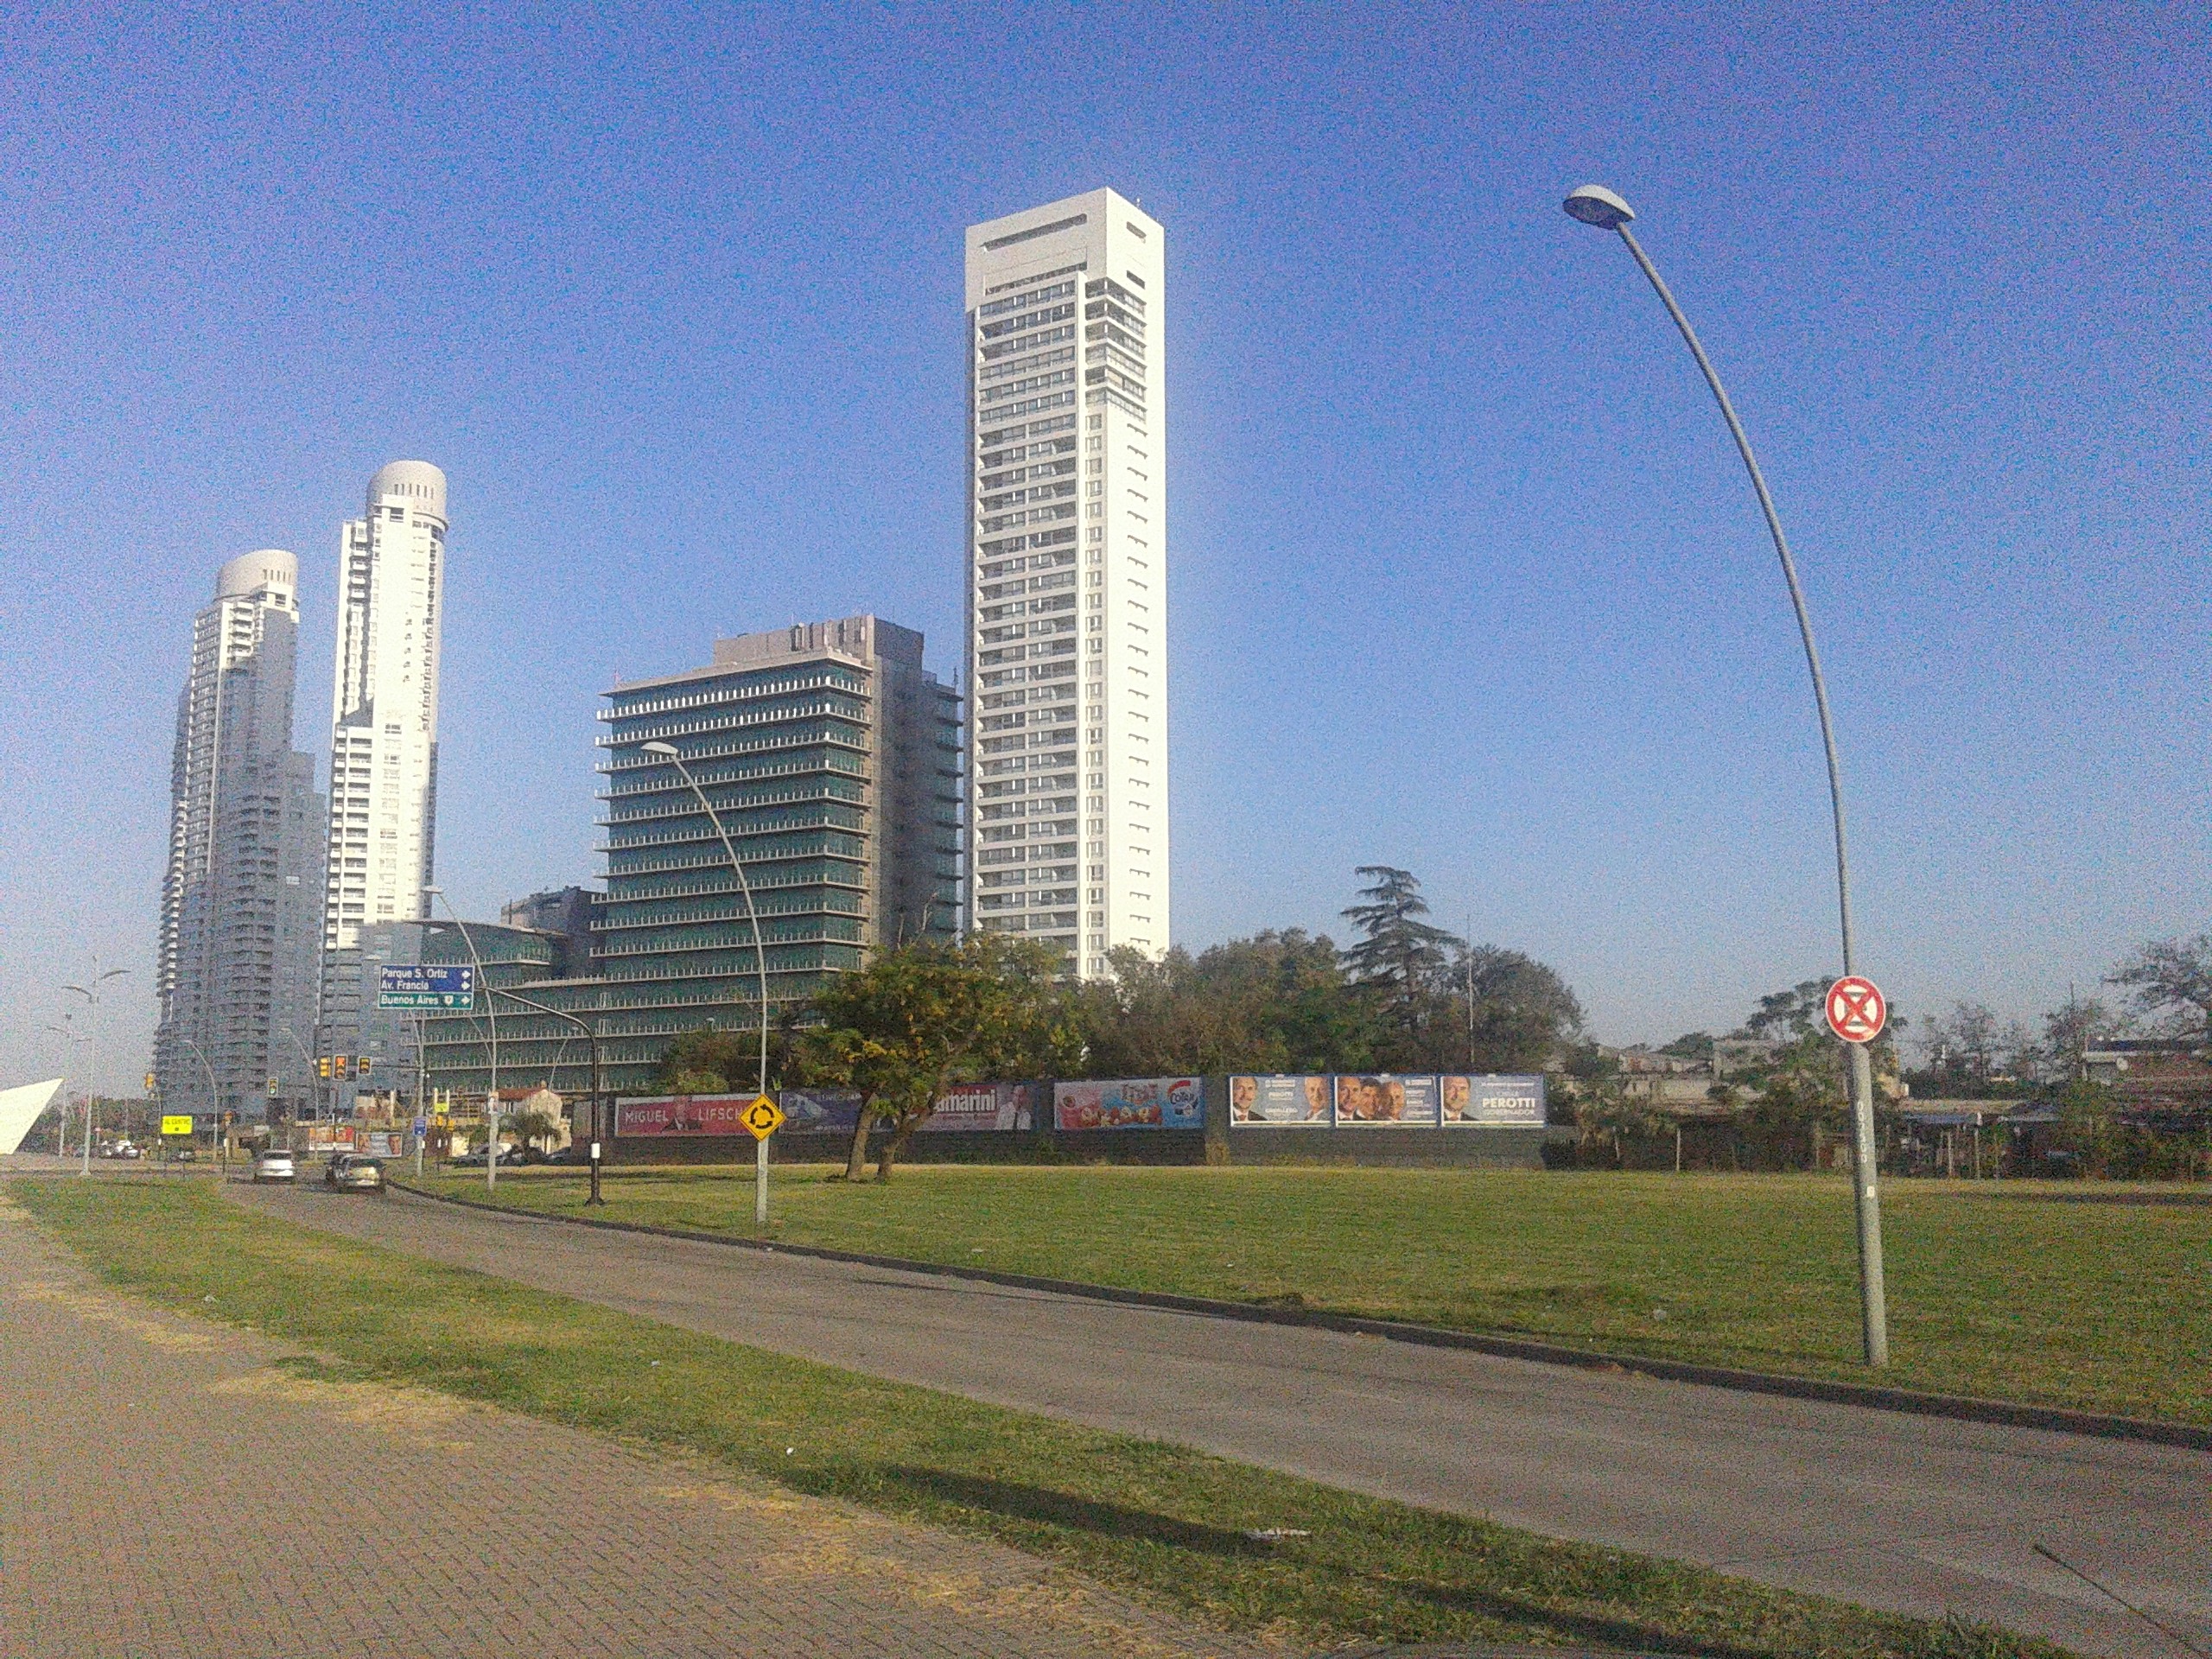 General 2560x1920 building outdoors city Argentina South America